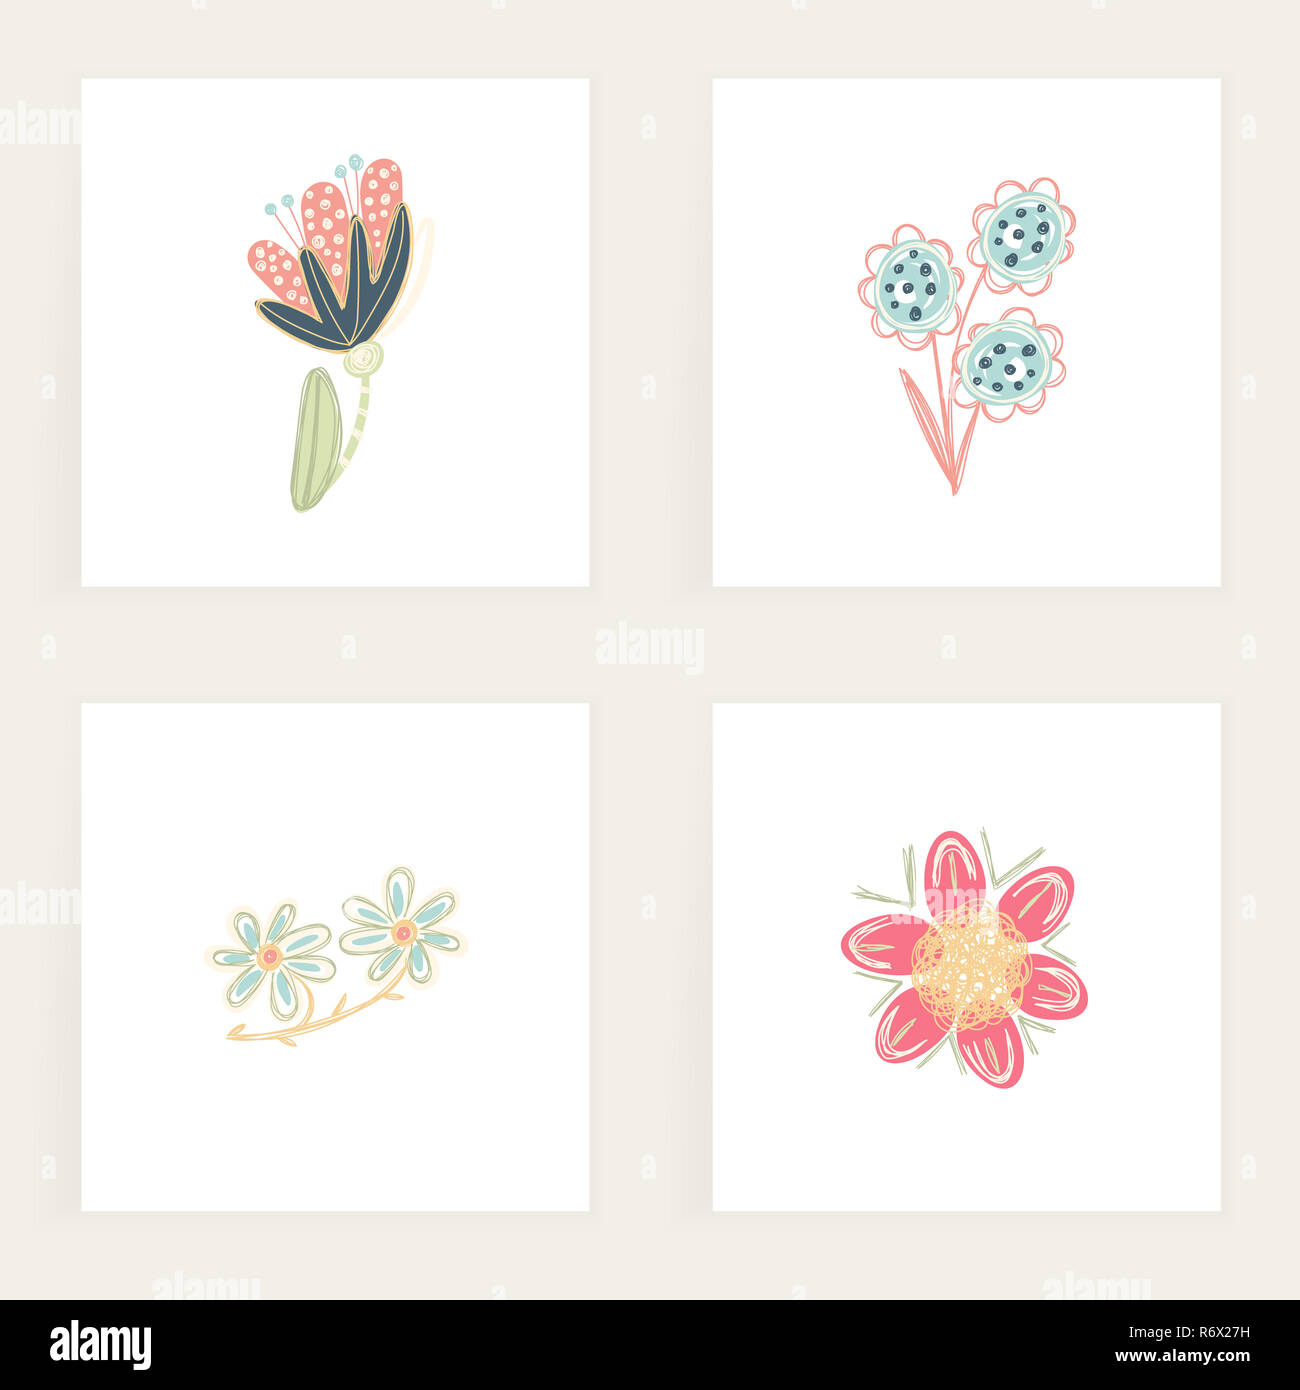 Set of square cards. Hand drawn creative abstract flowers. Floral design. Colorful artistic backgrounds with blossom. It can be used for invitation, message, postcard, cover Stock Photo